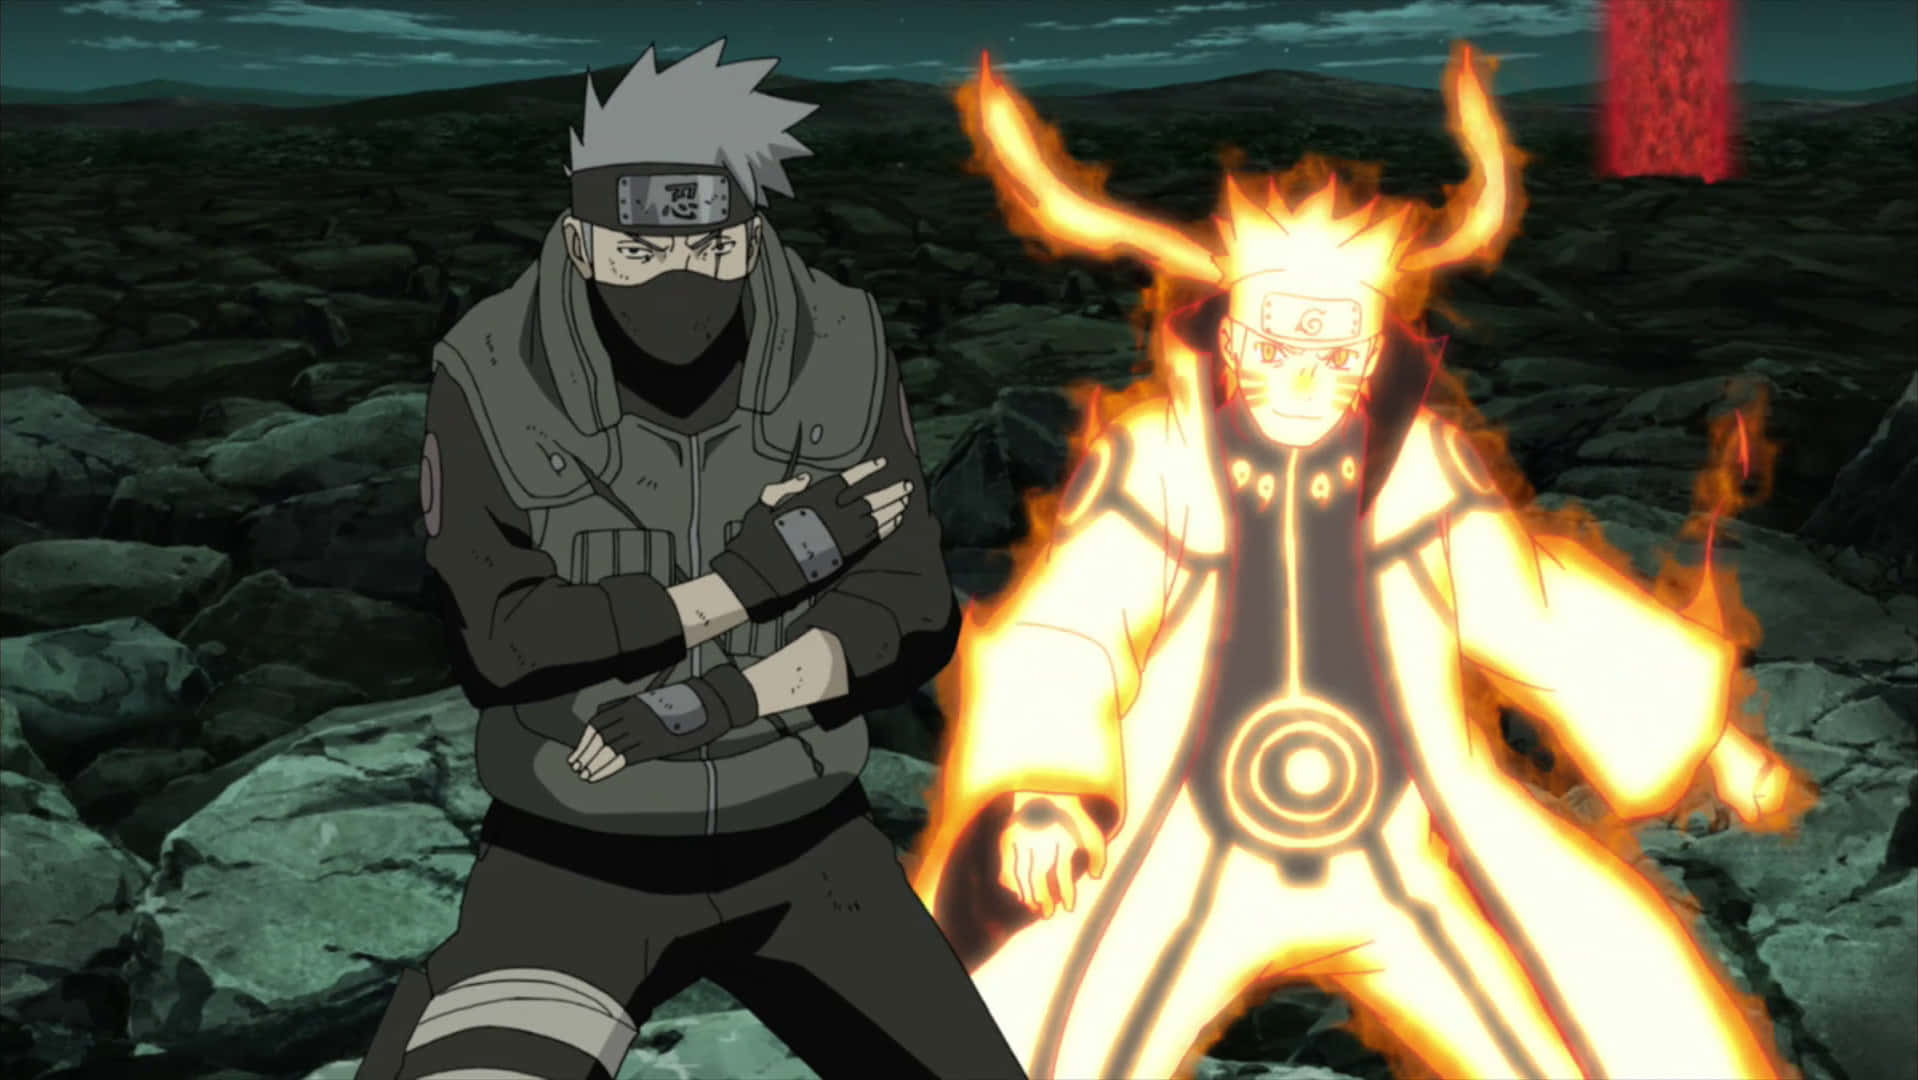 Exciting moment in Konoha: Kakashi and Naruto in a lively collaboration Wallpaper